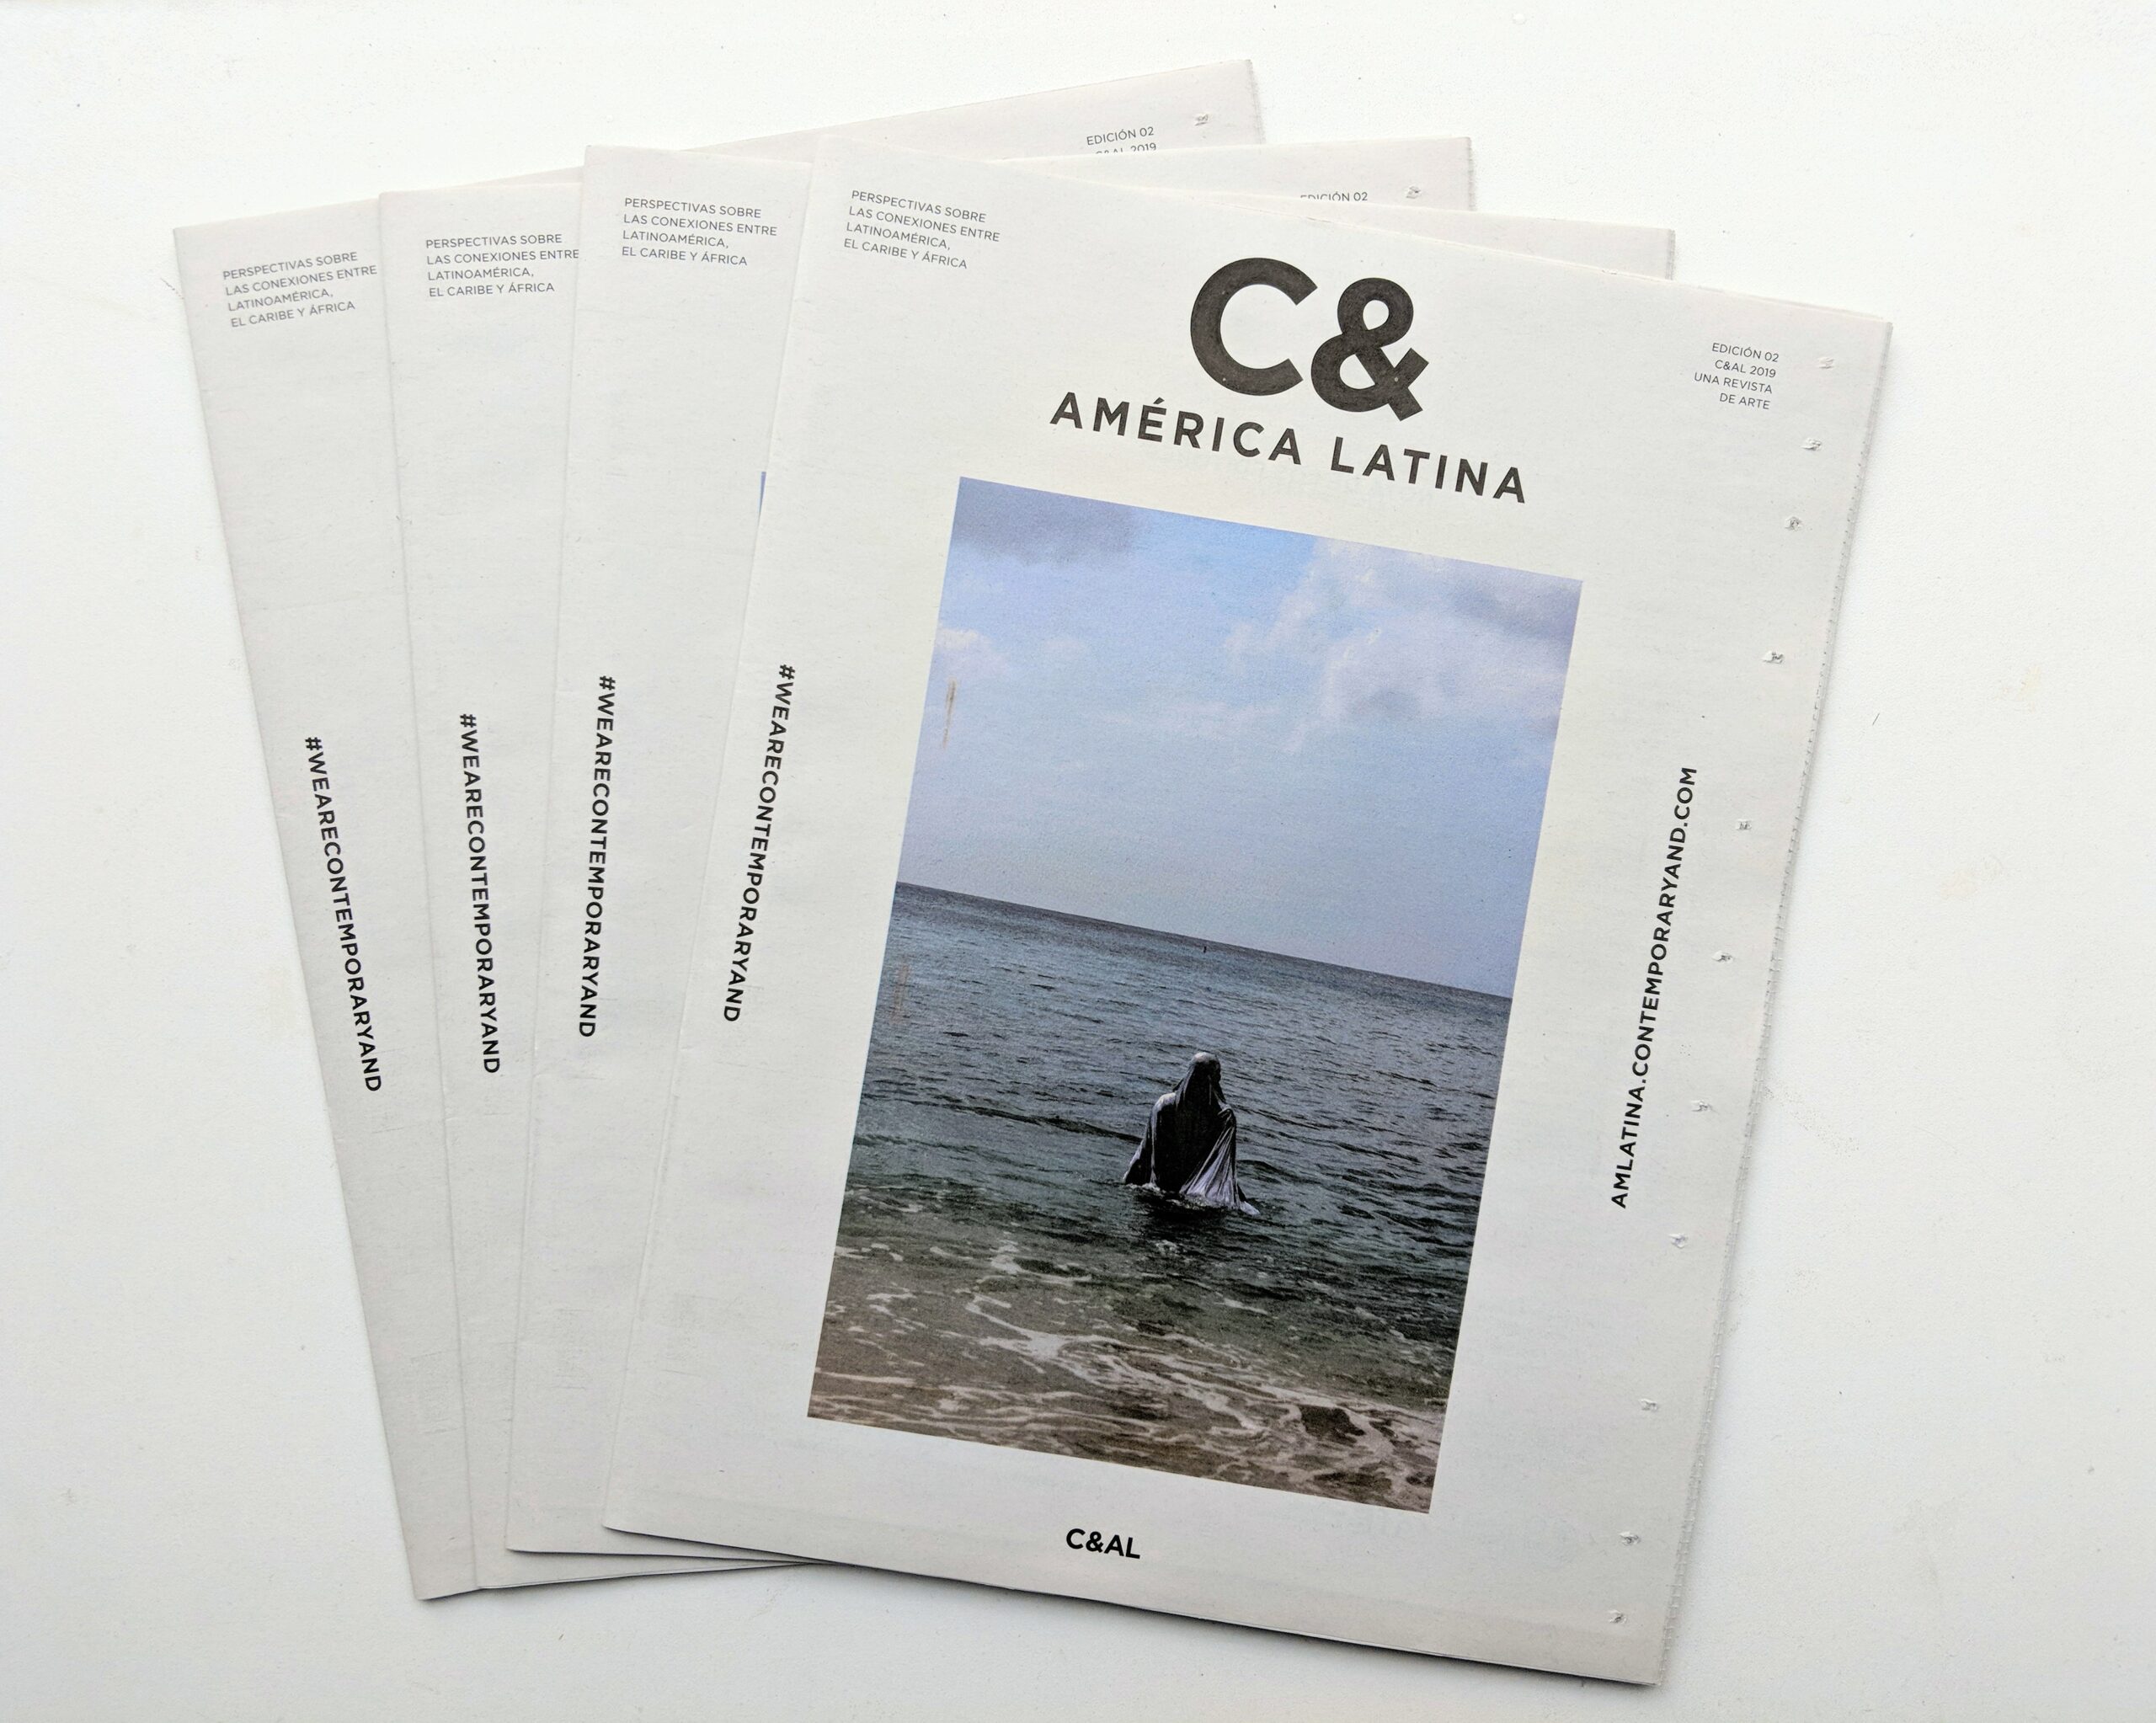 The Second Edition of the C& América Latina (C&AL) Print Issue